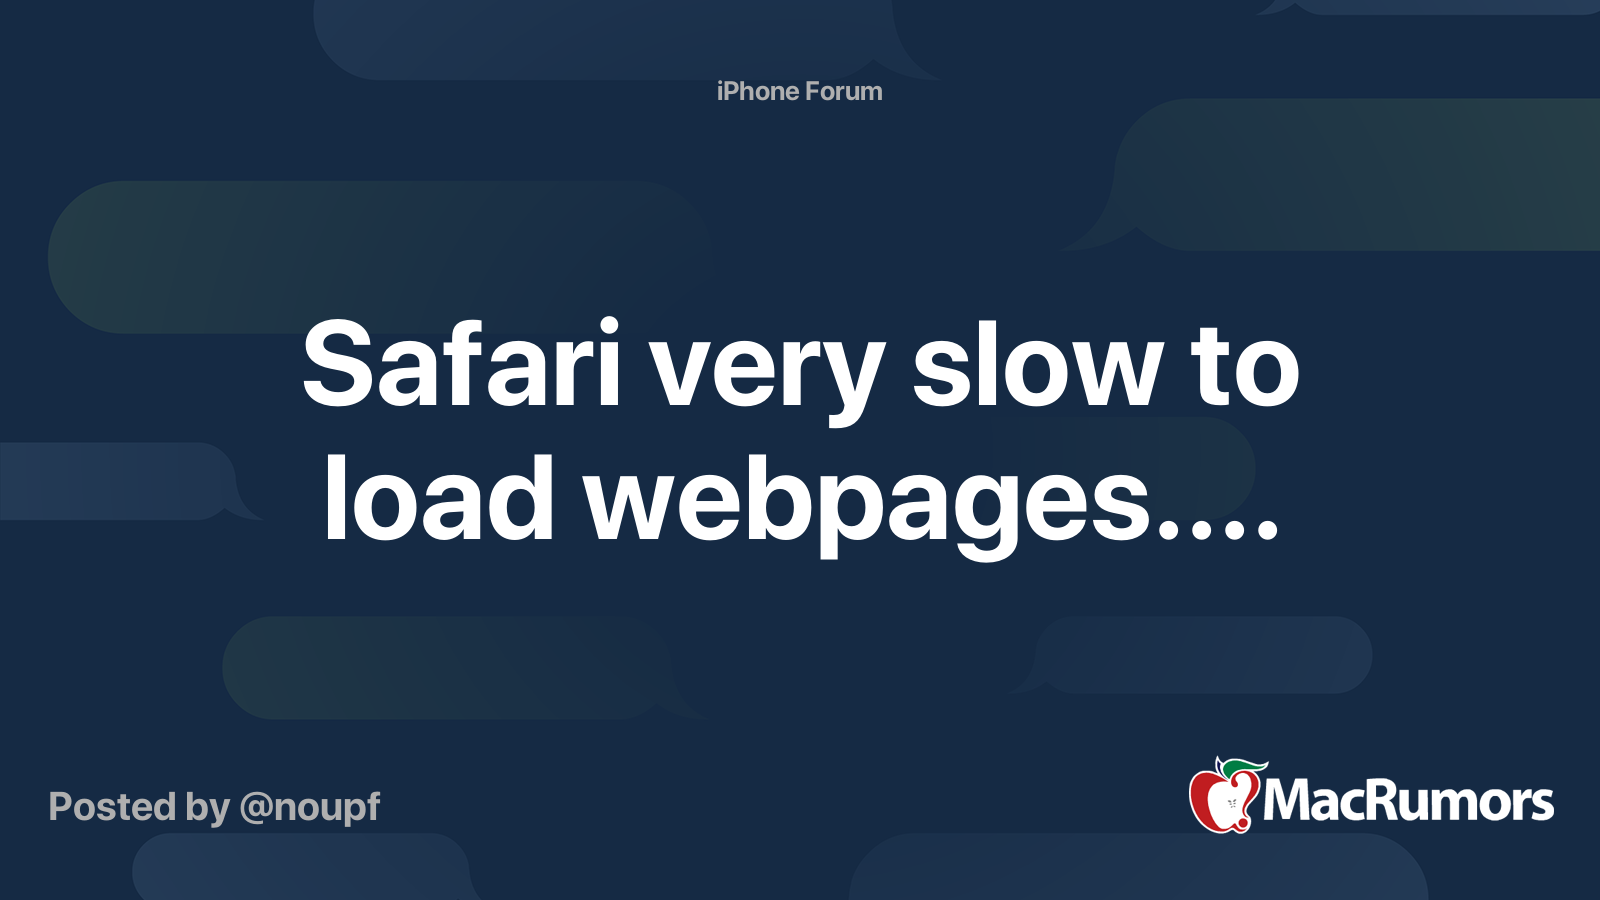 safari web browser very slow to load